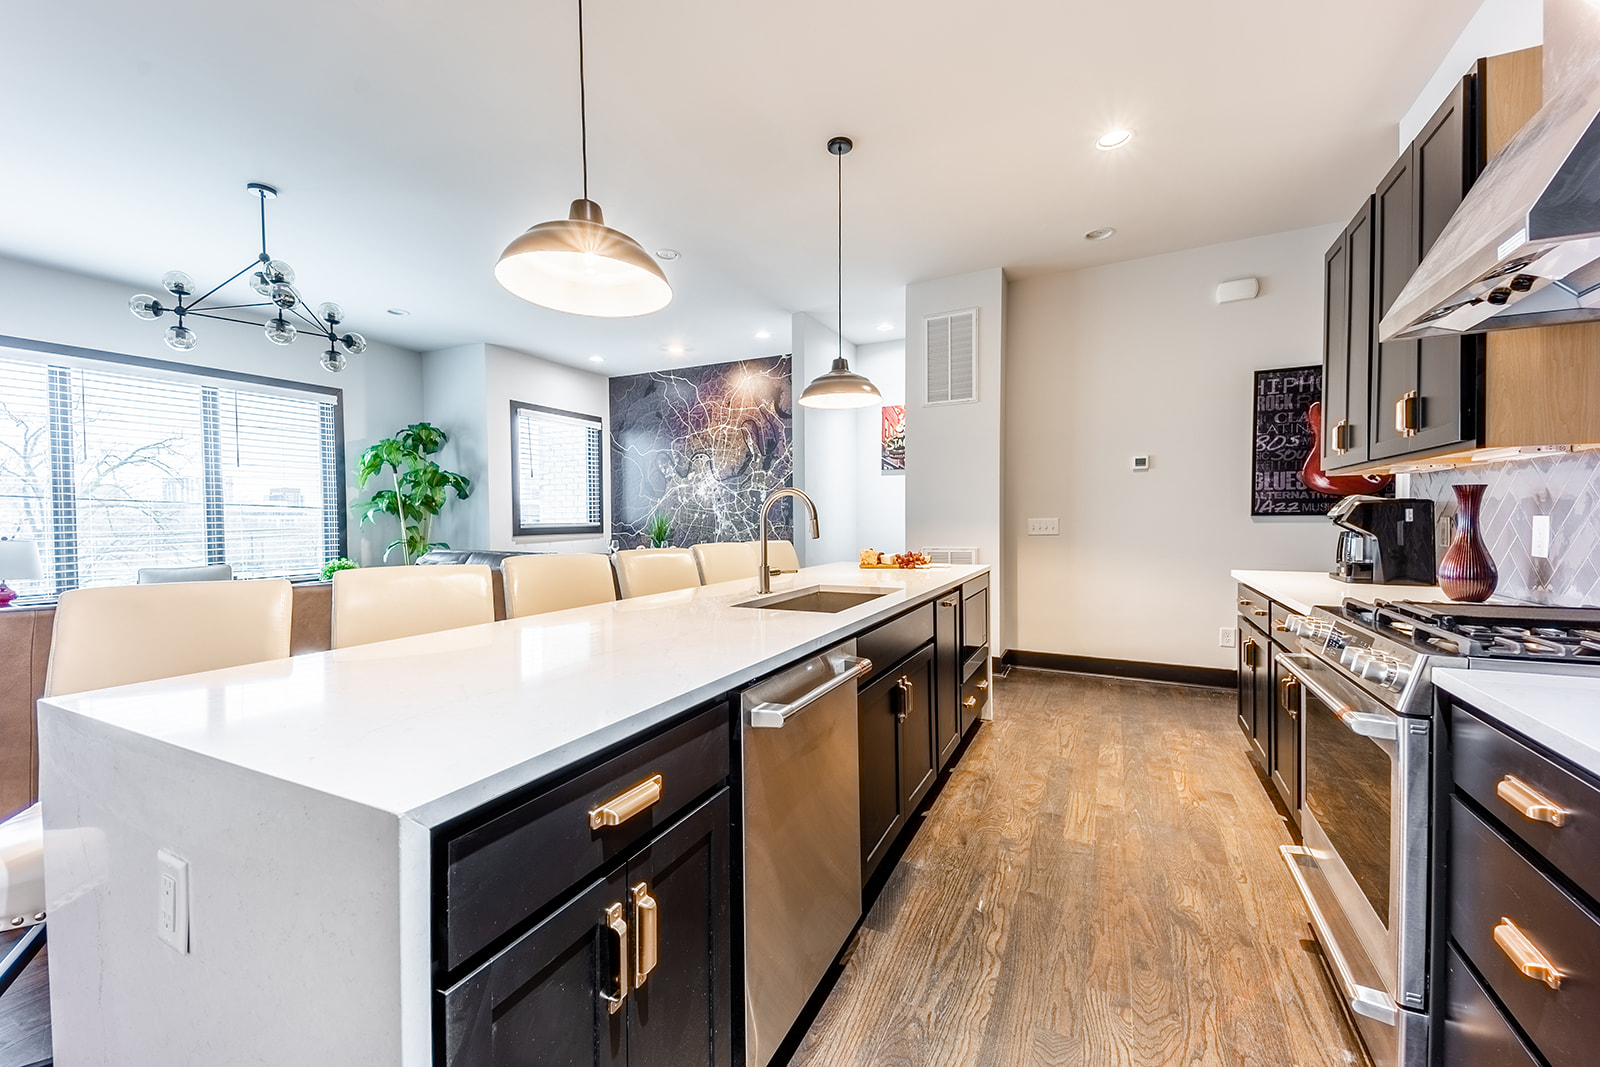 1st unit: Gourmet style kitchen fully stocked with your basic cooking essentials. Includes stainless steel appliances and breakfast bar seating.